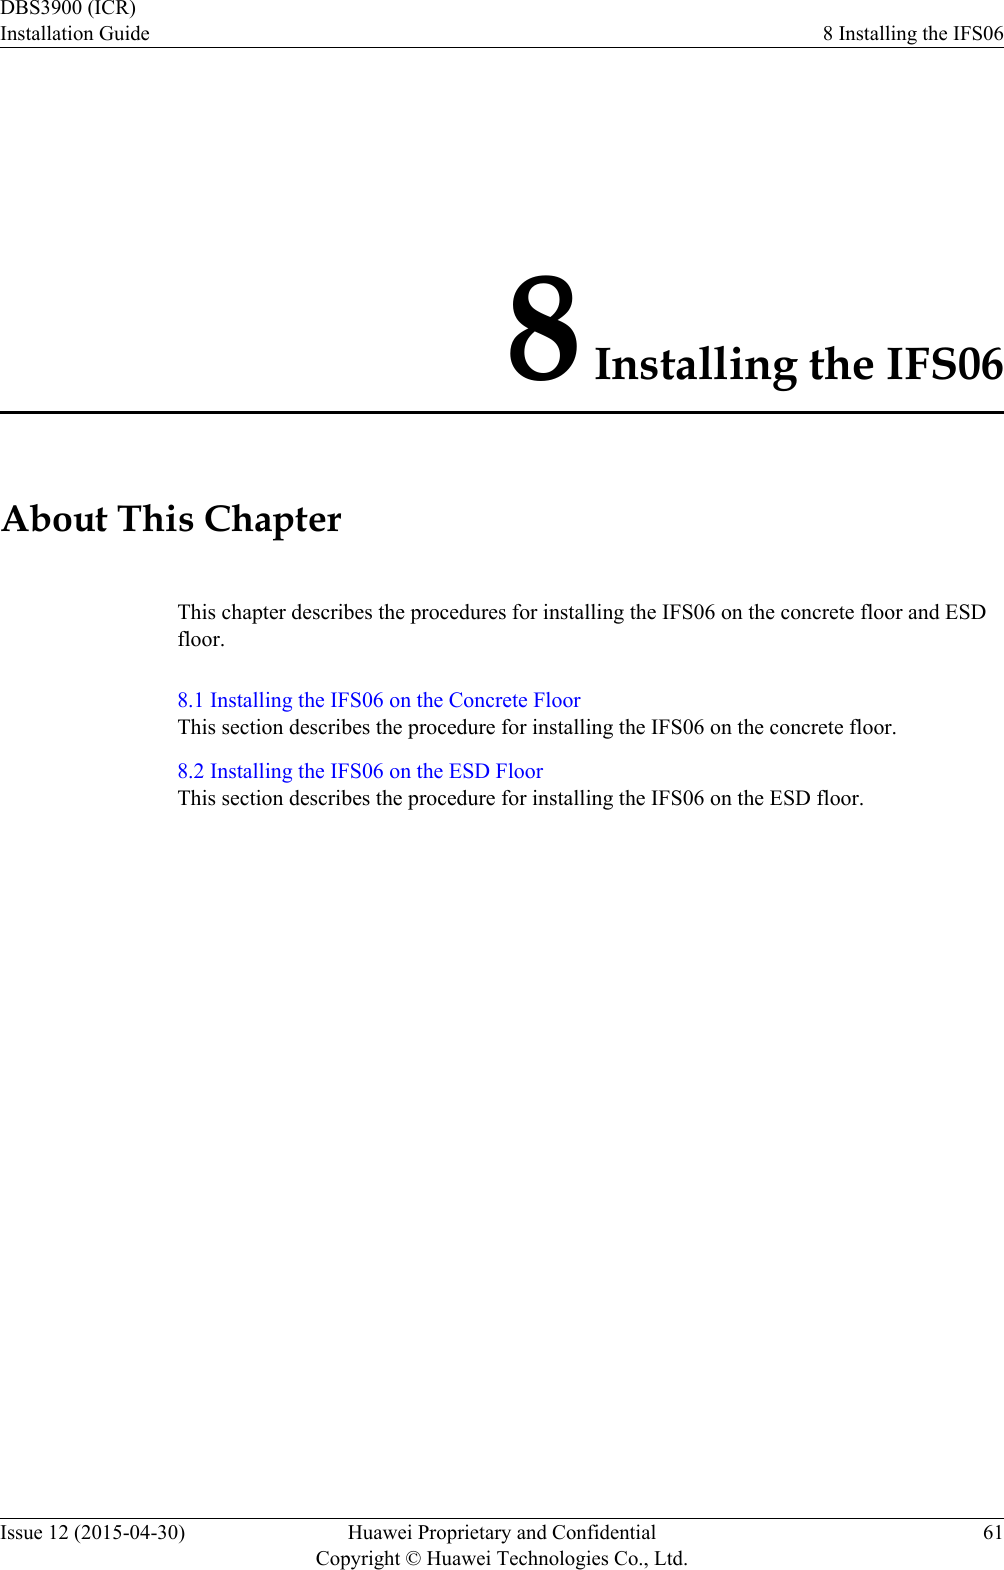 8 Installing the IFS06About This ChapterThis chapter describes the procedures for installing the IFS06 on the concrete floor and ESDfloor.8.1 Installing the IFS06 on the Concrete FloorThis section describes the procedure for installing the IFS06 on the concrete floor.8.2 Installing the IFS06 on the ESD FloorThis section describes the procedure for installing the IFS06 on the ESD floor.DBS3900 (ICR)Installation Guide 8 Installing the IFS06Issue 12 (2015-04-30) Huawei Proprietary and ConfidentialCopyright © Huawei Technologies Co., Ltd.61